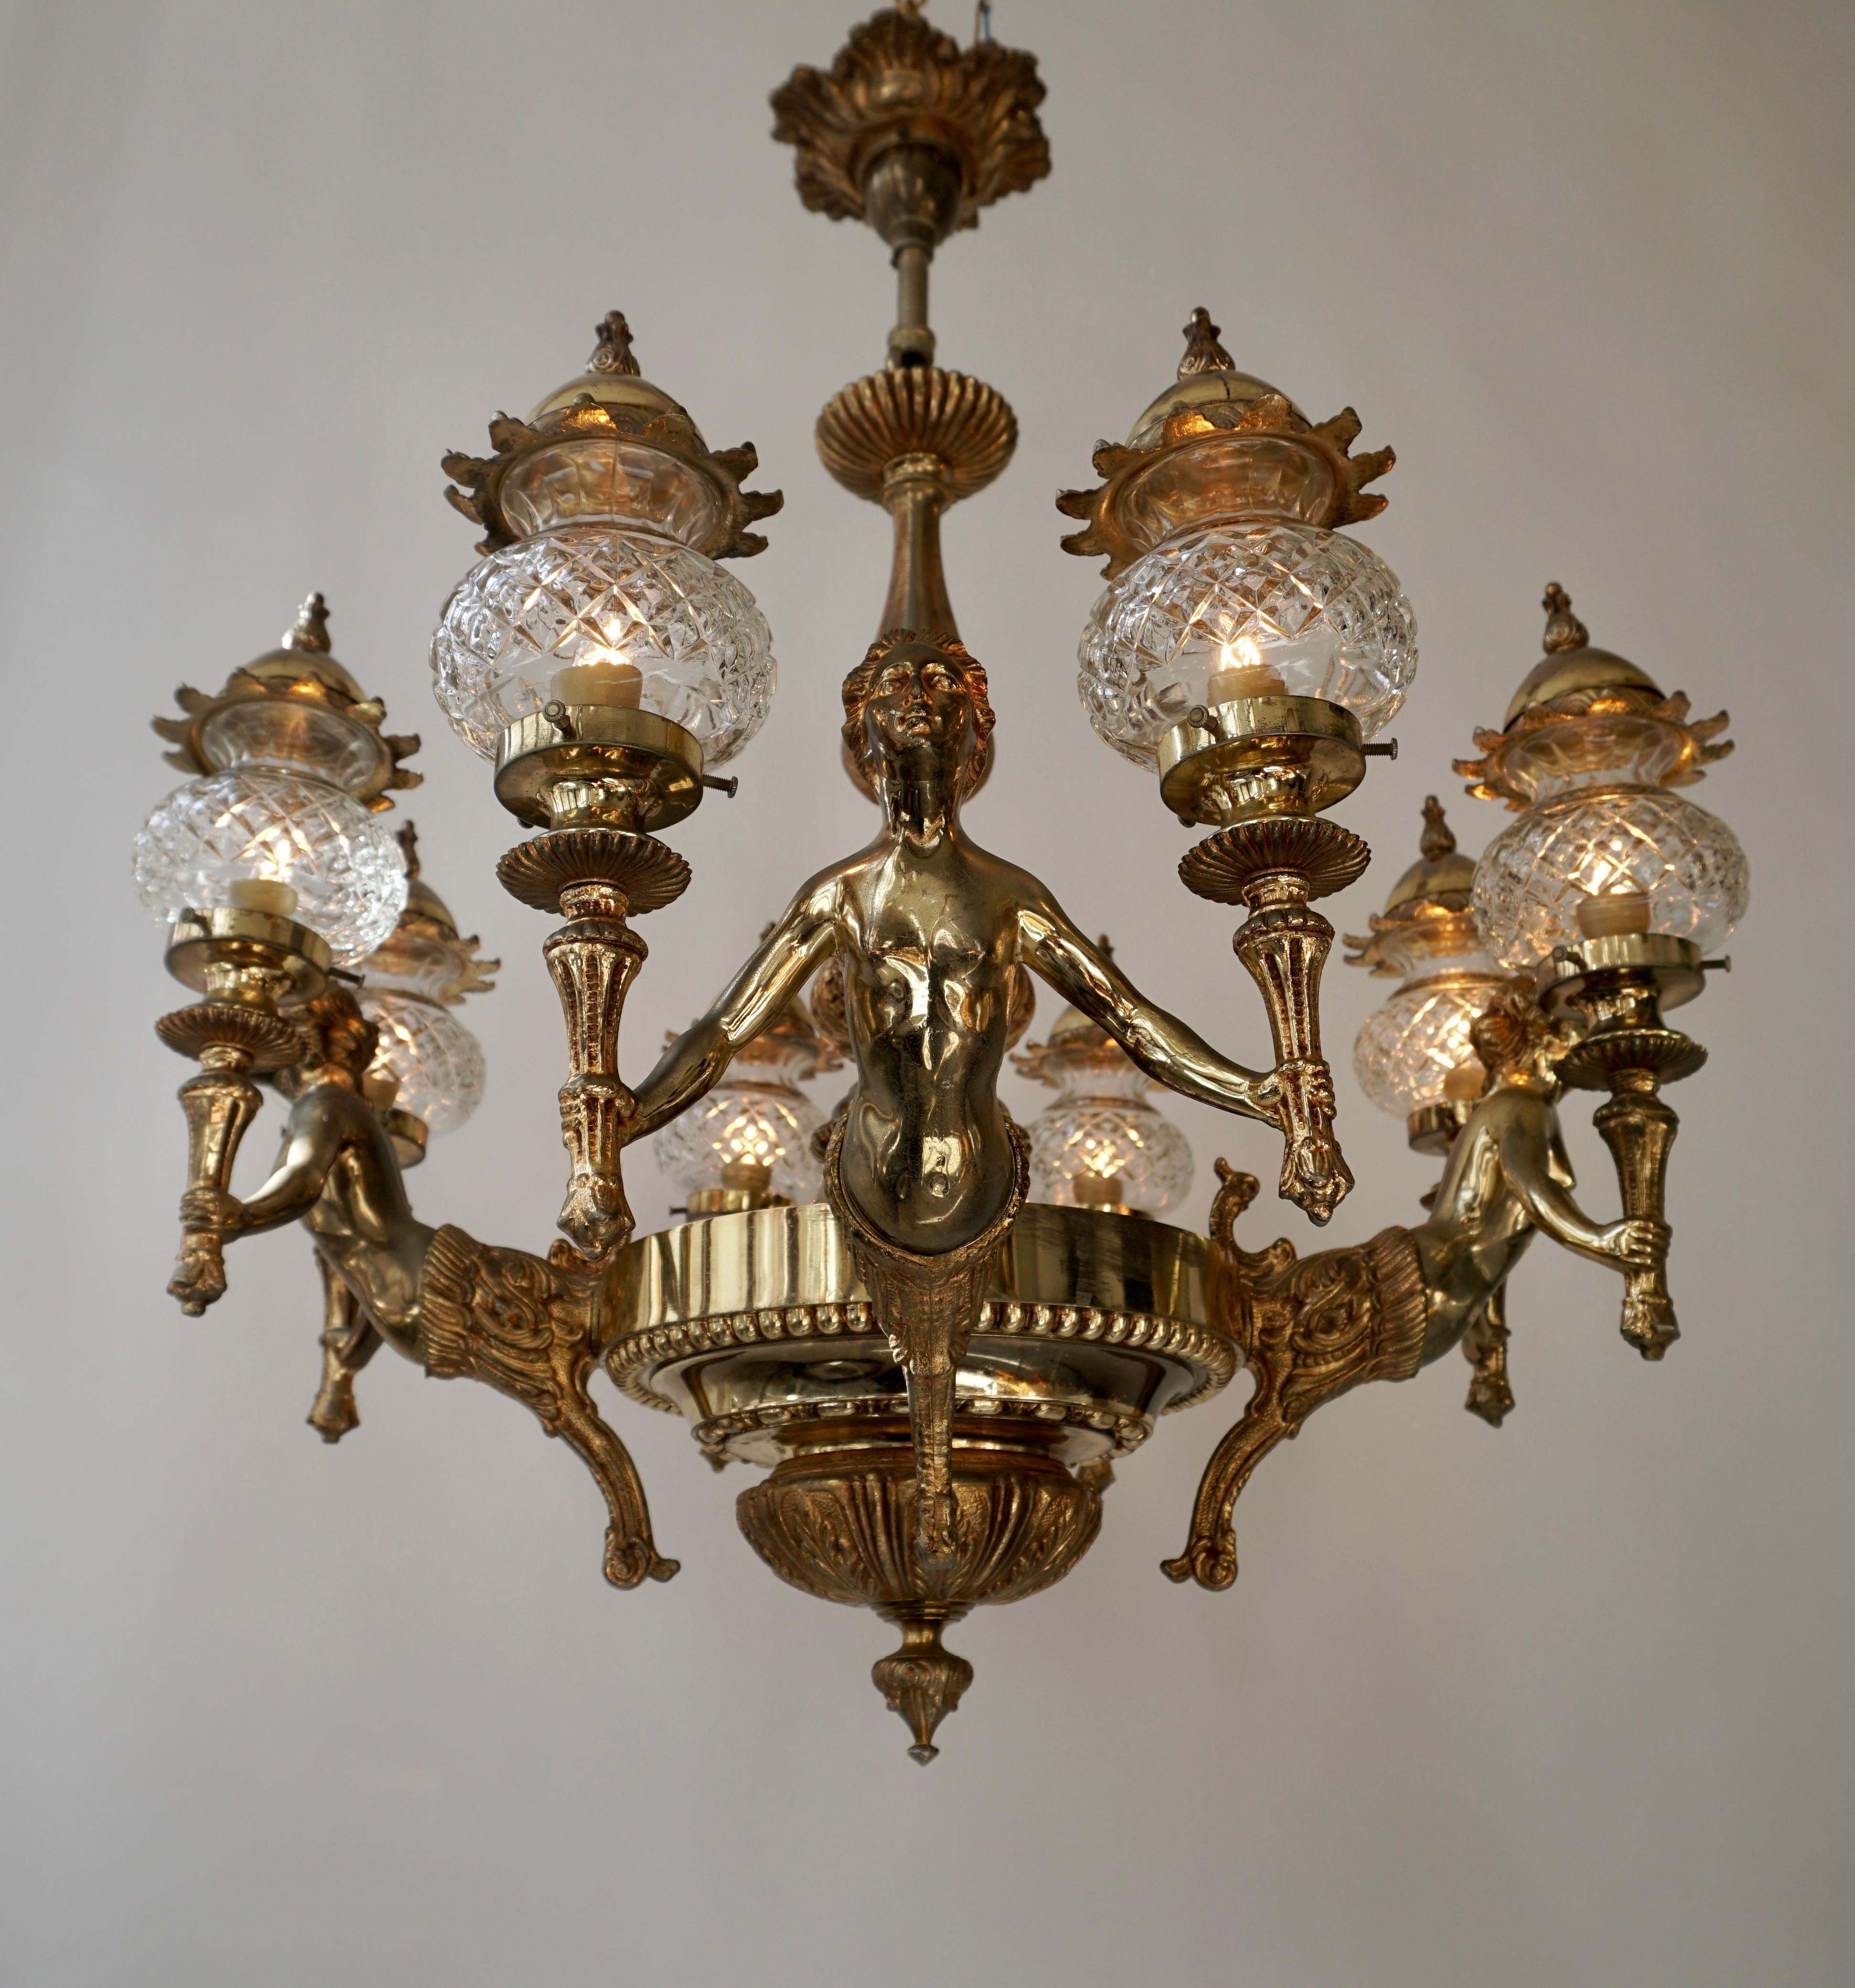 Large French bronze chandelier with angels holding double torches with crystal globes.
Italy, circa 1950.

Measures: Diameter 27 inch - 68 cm.
Height fixture 24 inch - 61 cm.
Total height including the chain and ceiling plate is 32 inch - 80